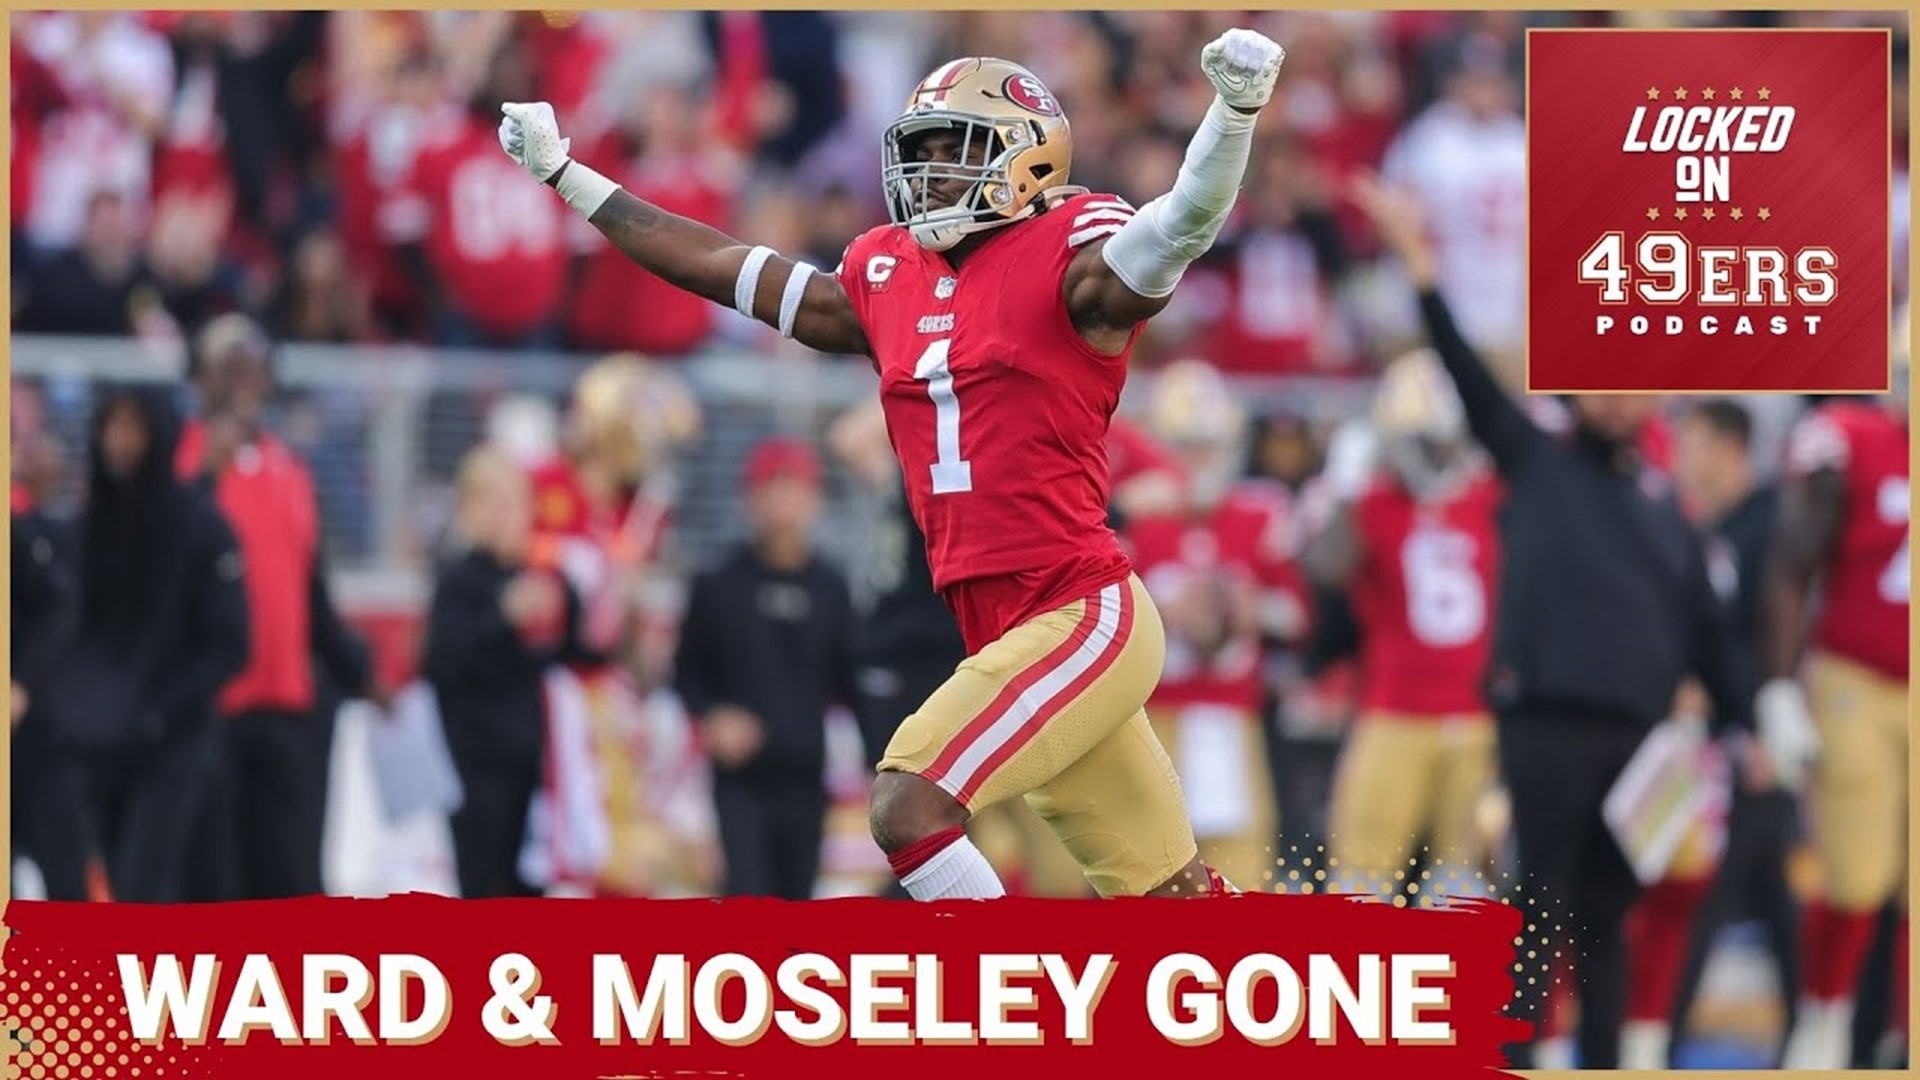 The longest tenured player on the San Francisco 49ers roster, Jimmie Ward, signs a free agent contract with the Houston Texans. Emmanuel Moseley leaves the 49ers